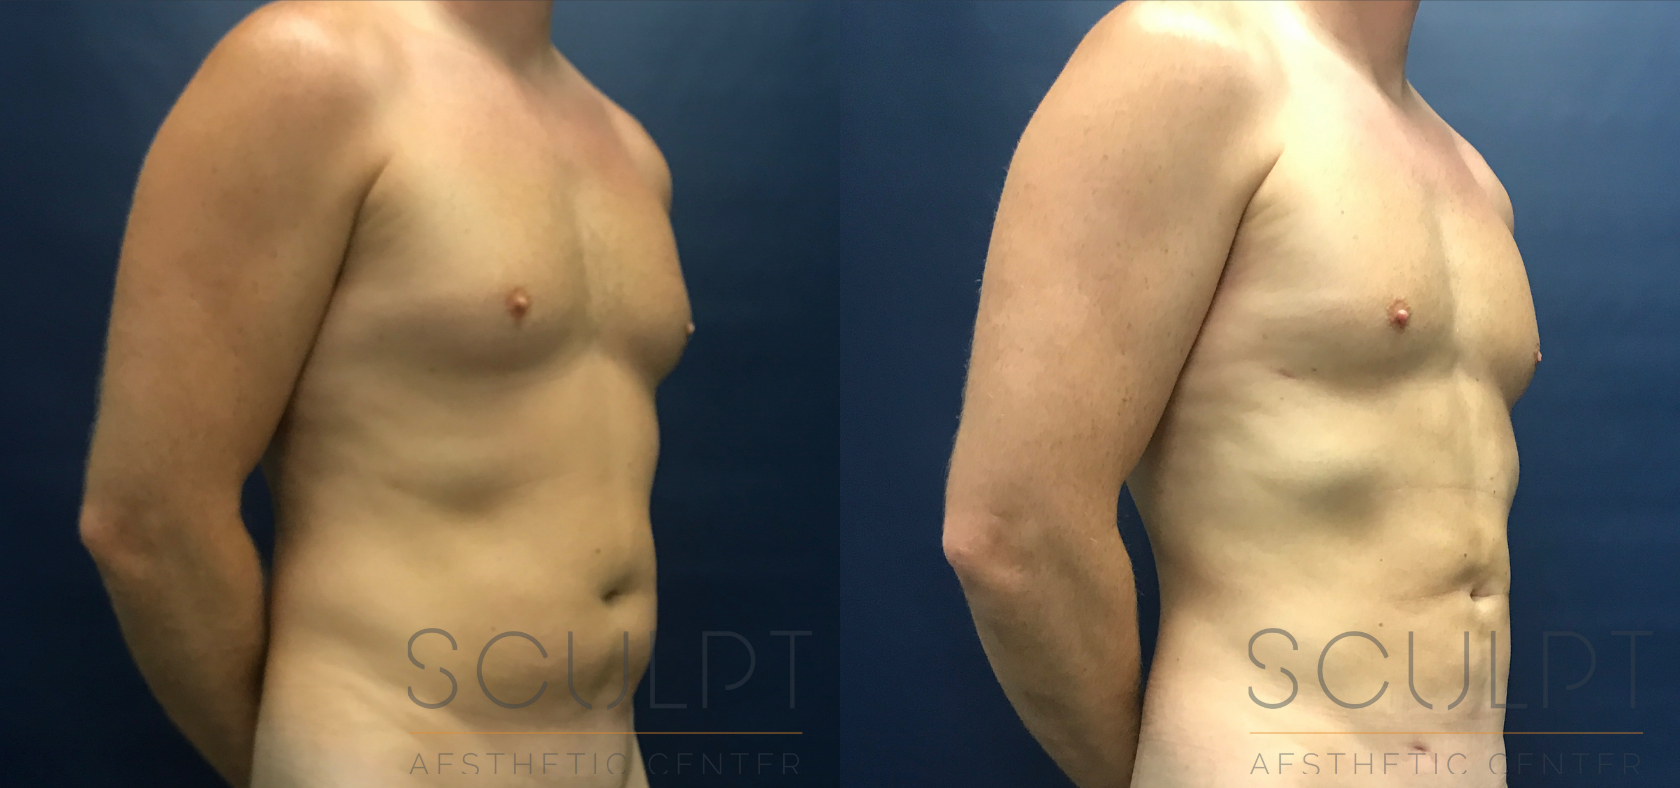 Liposuction to the Abdomen, Chest, Flanks Before and After Photo by Sculpt Aesthetic Center in Frisco, TX